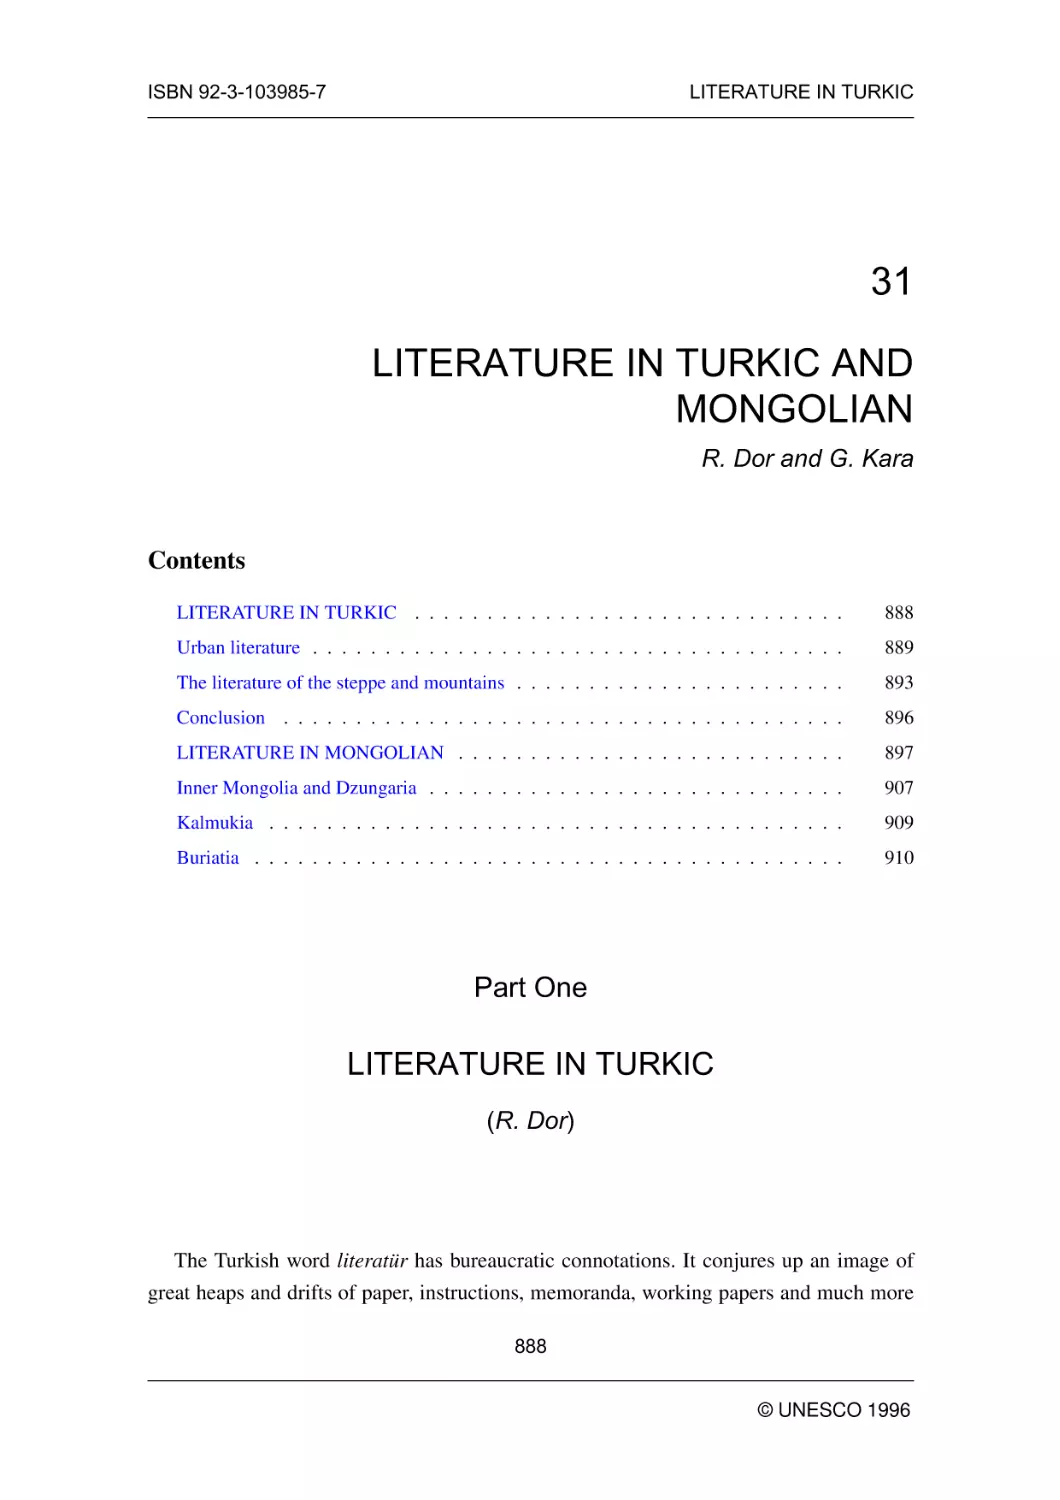 LITERATURE IN TURKIC AND MONGOLIAN